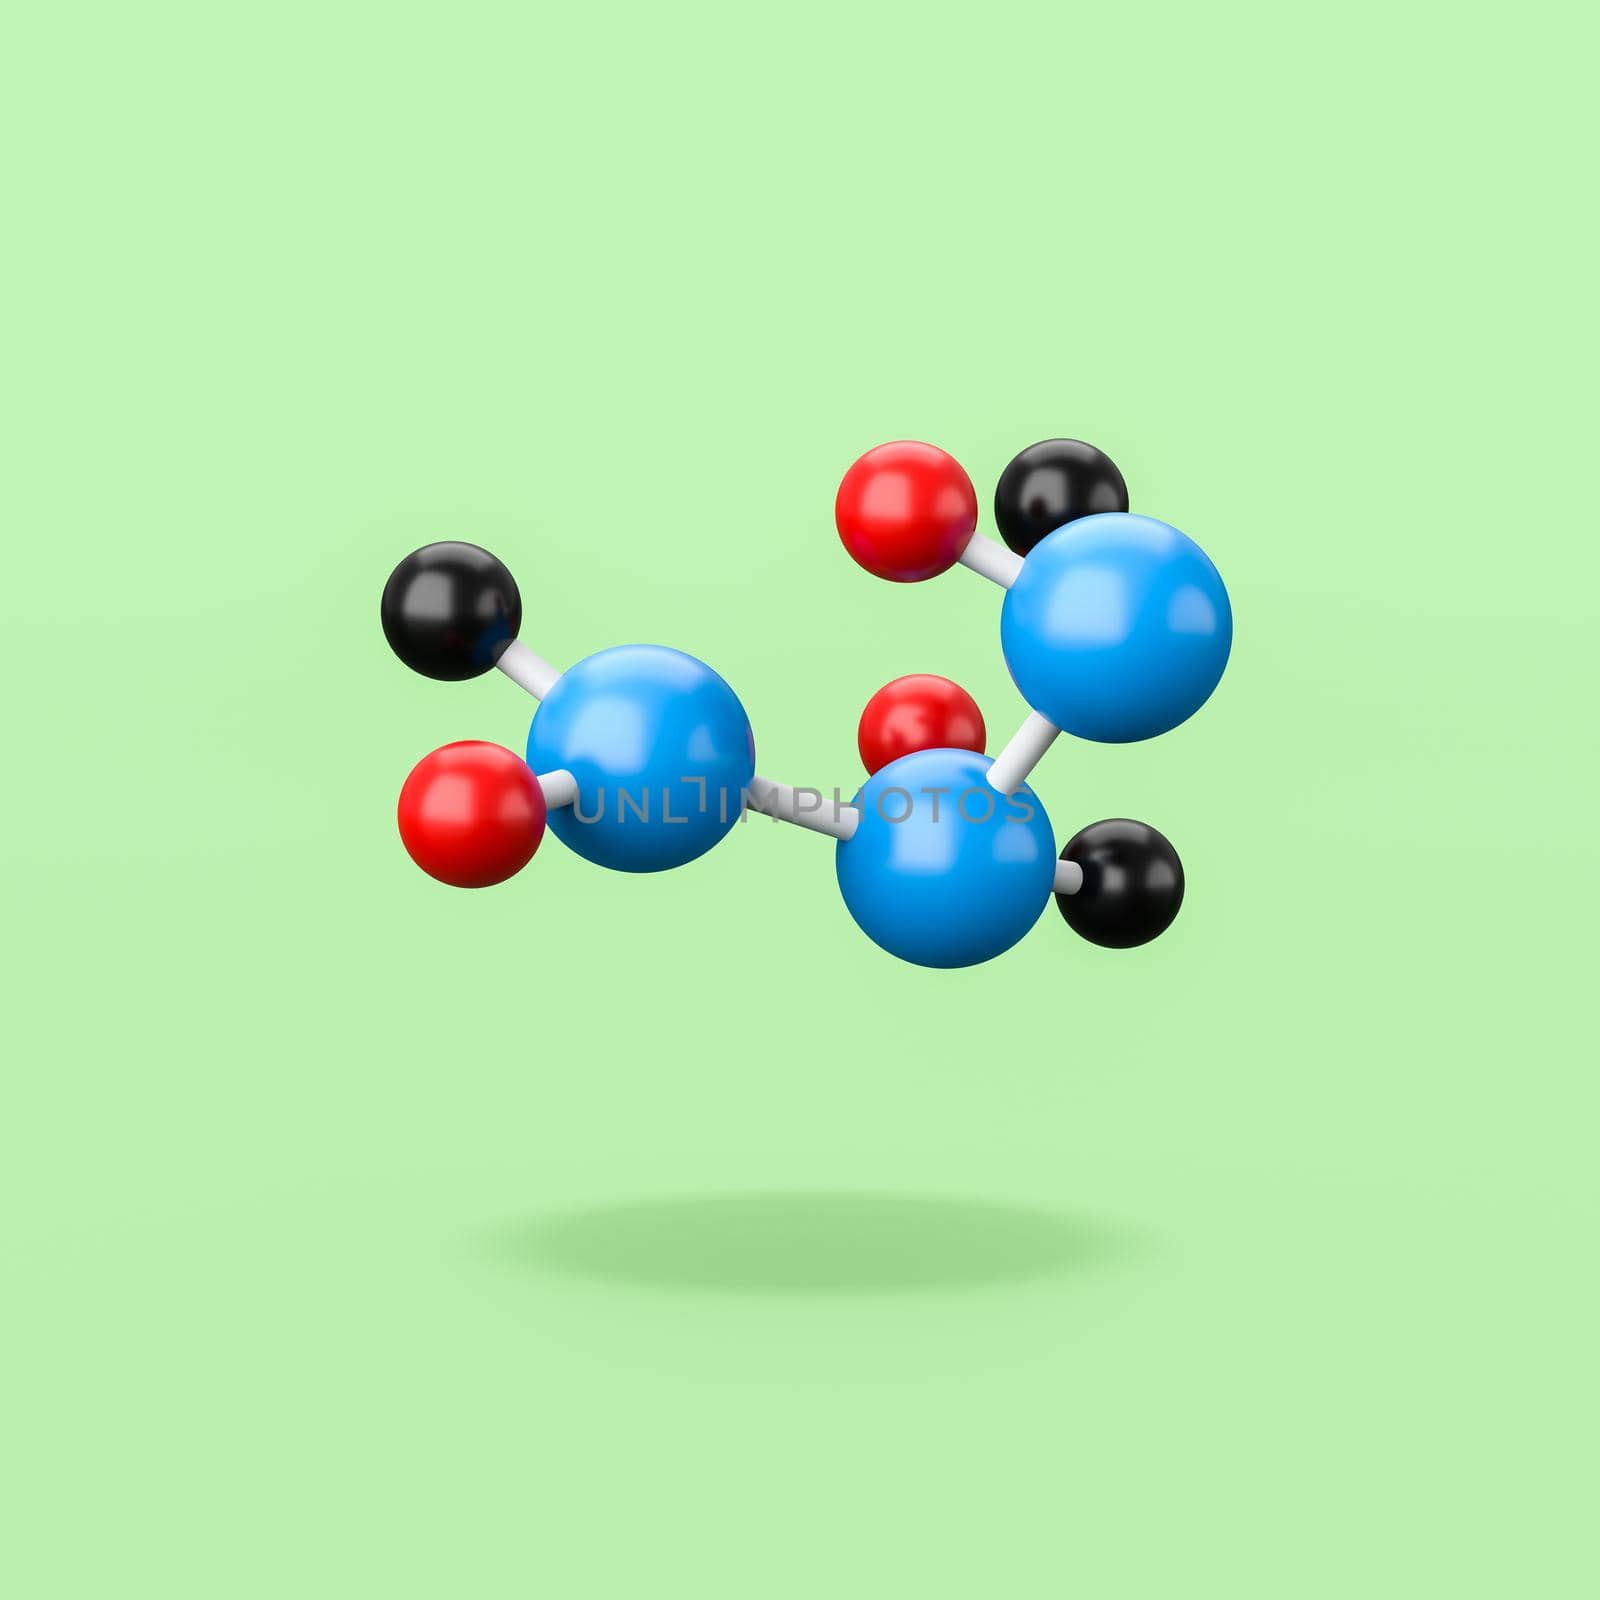 Molecule Shape Structure Isolated on Flat Green Background with Shadow 3D Illustration